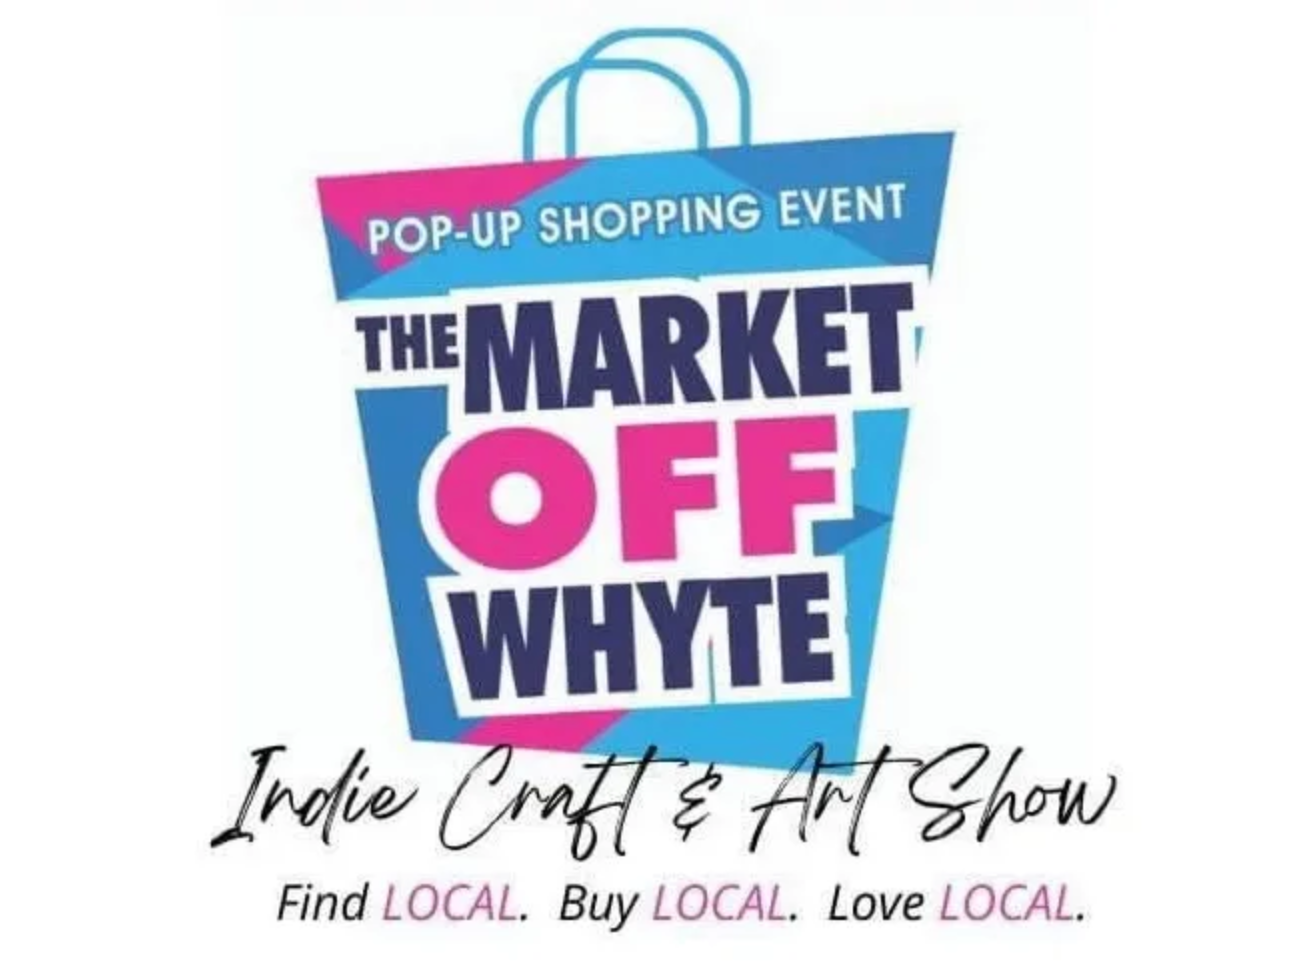 The Market off Whyte: Indie Craft & Art Show. Find LOCAL. Buy LOCAL. Love LOCAL.